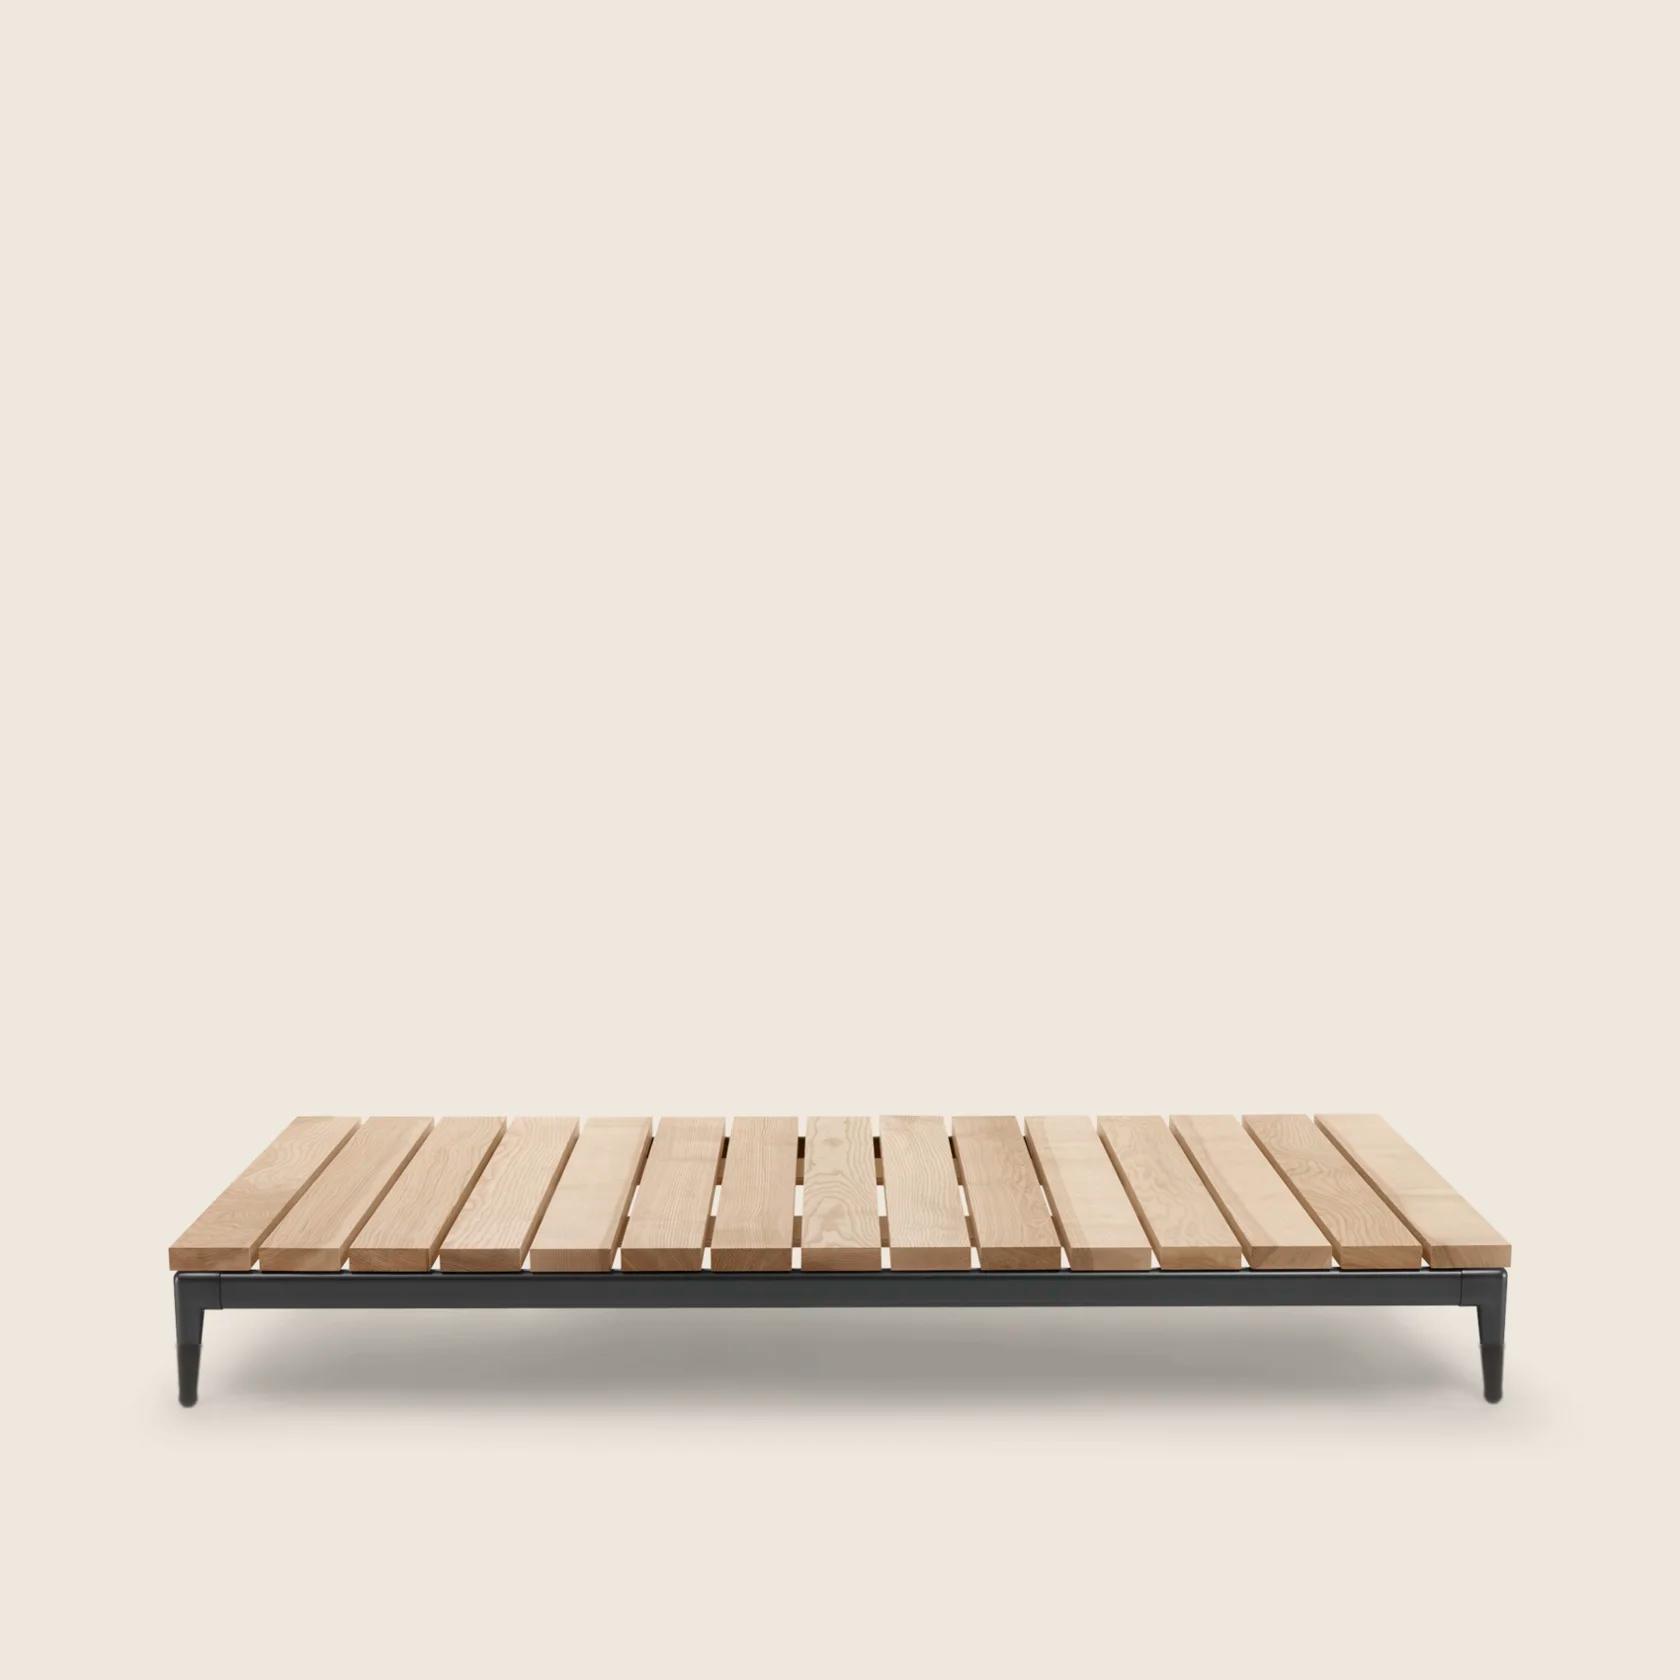 0283H1_PICO OUTDOOR_COFFEETABLE_04.png